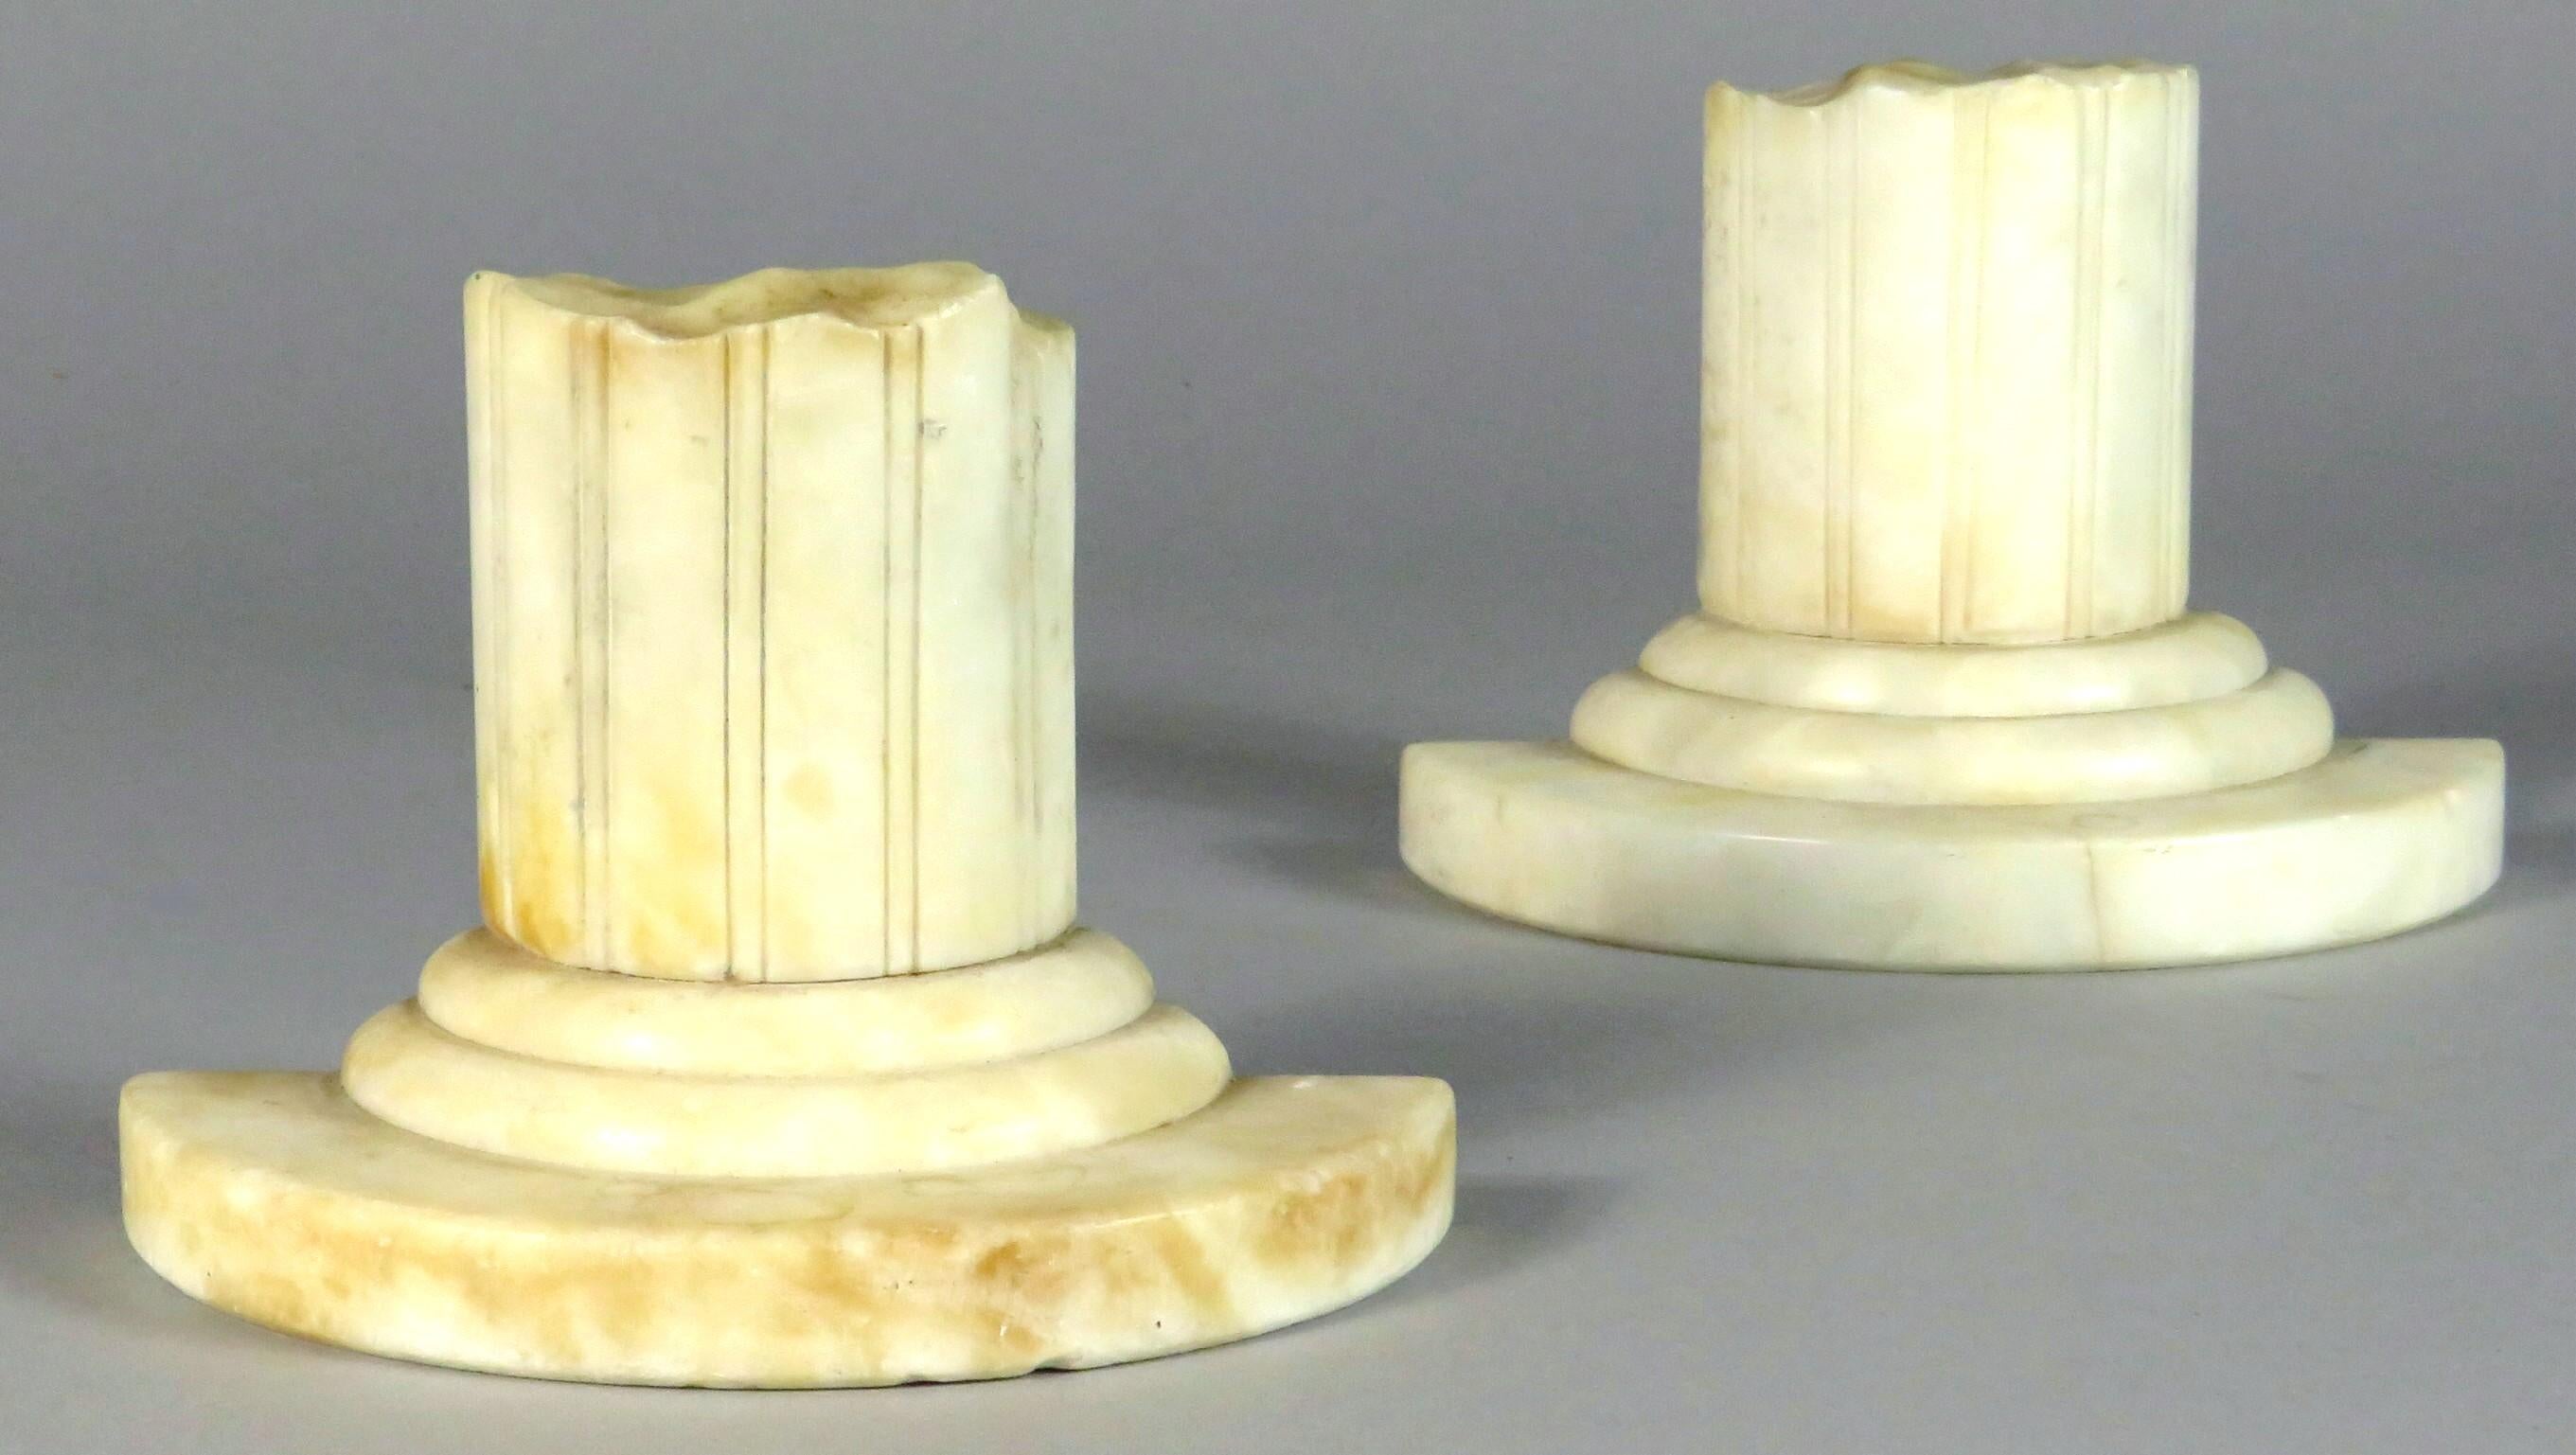 A very good pair of architectural inspired columnar bookends, both carved in the form of ancient ruins of reeded columns, raised on stepped bases. Dimensions noted are those shown facing front.